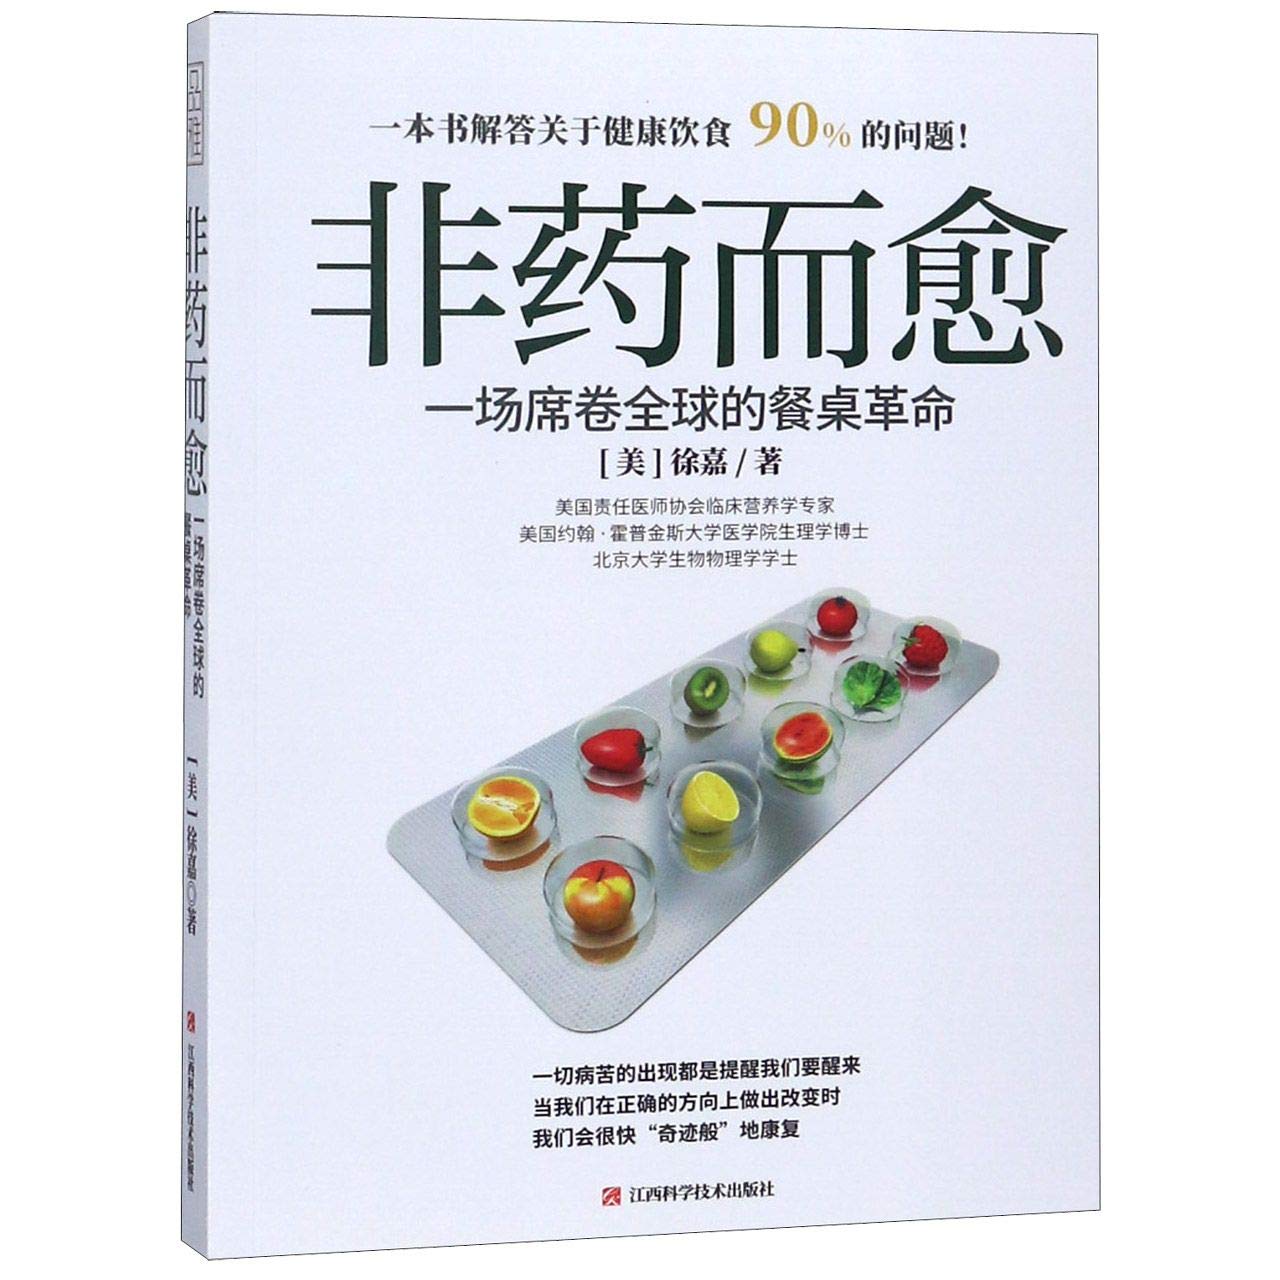 Vegetarian Diets (A Global Revolution on Table) (Chinese Edition)